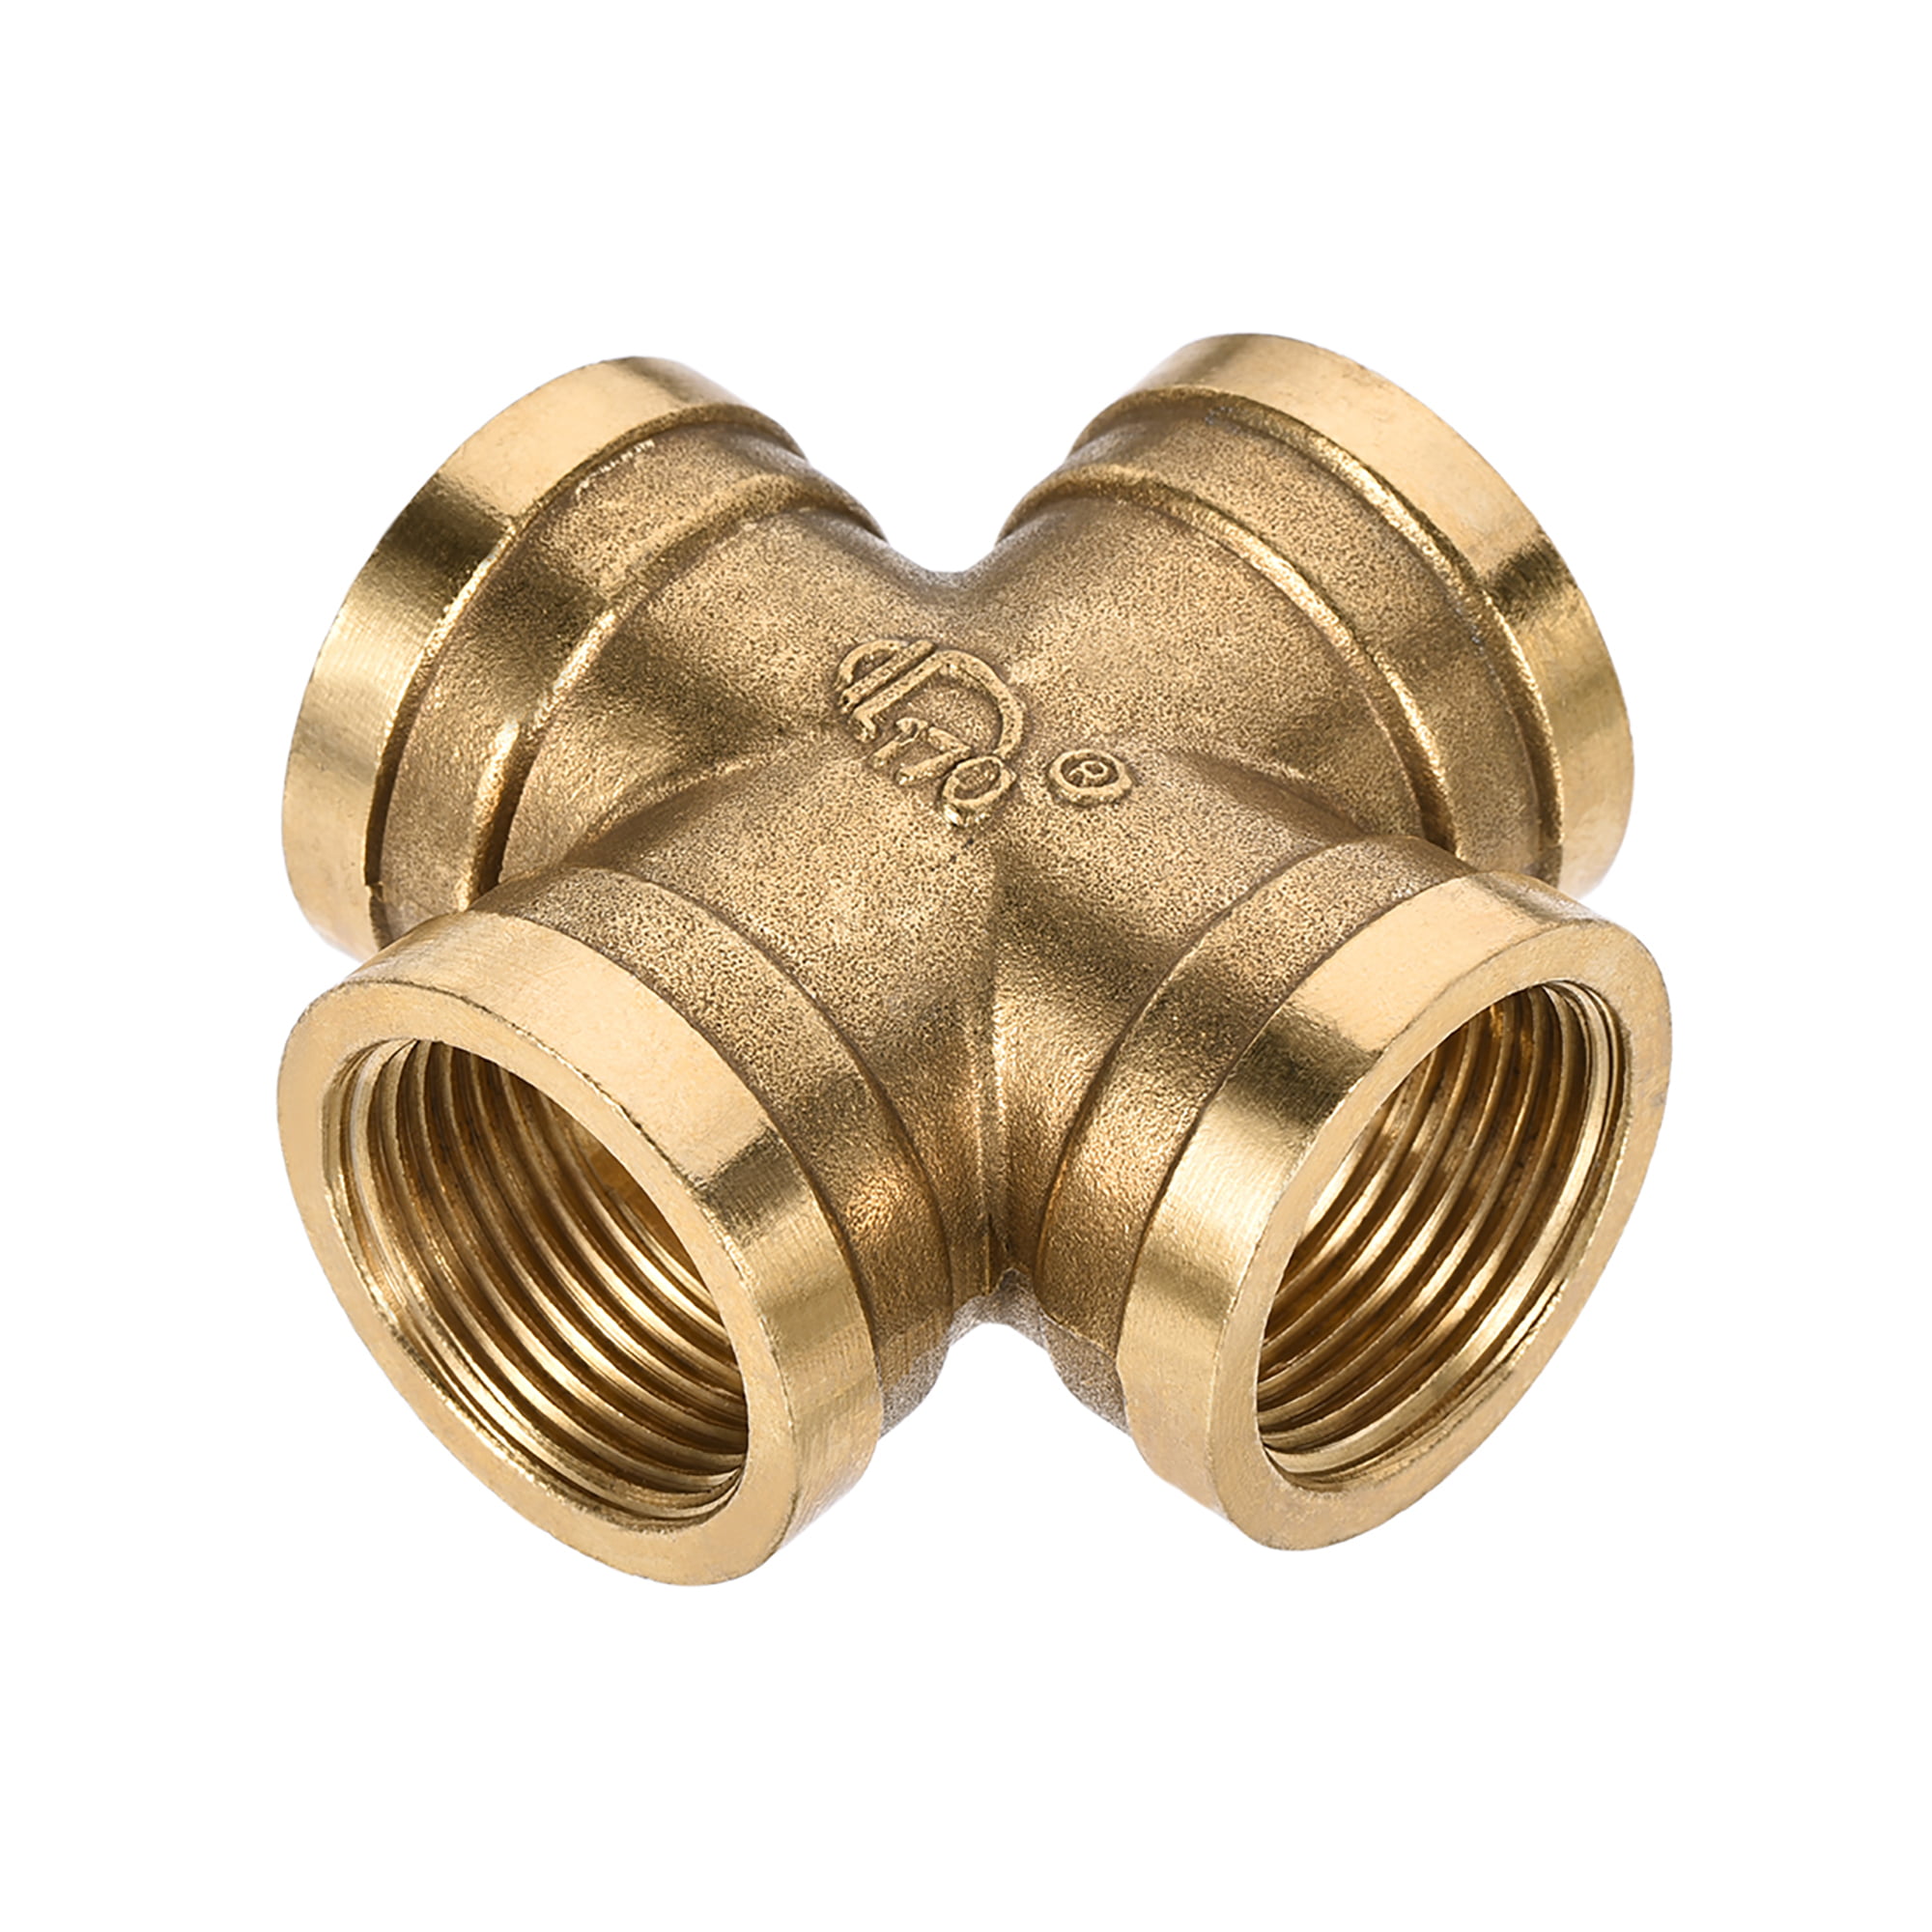 Brass Cross Pipe Fitting 3 4G Female Thread 4 Way Connectors Coupler